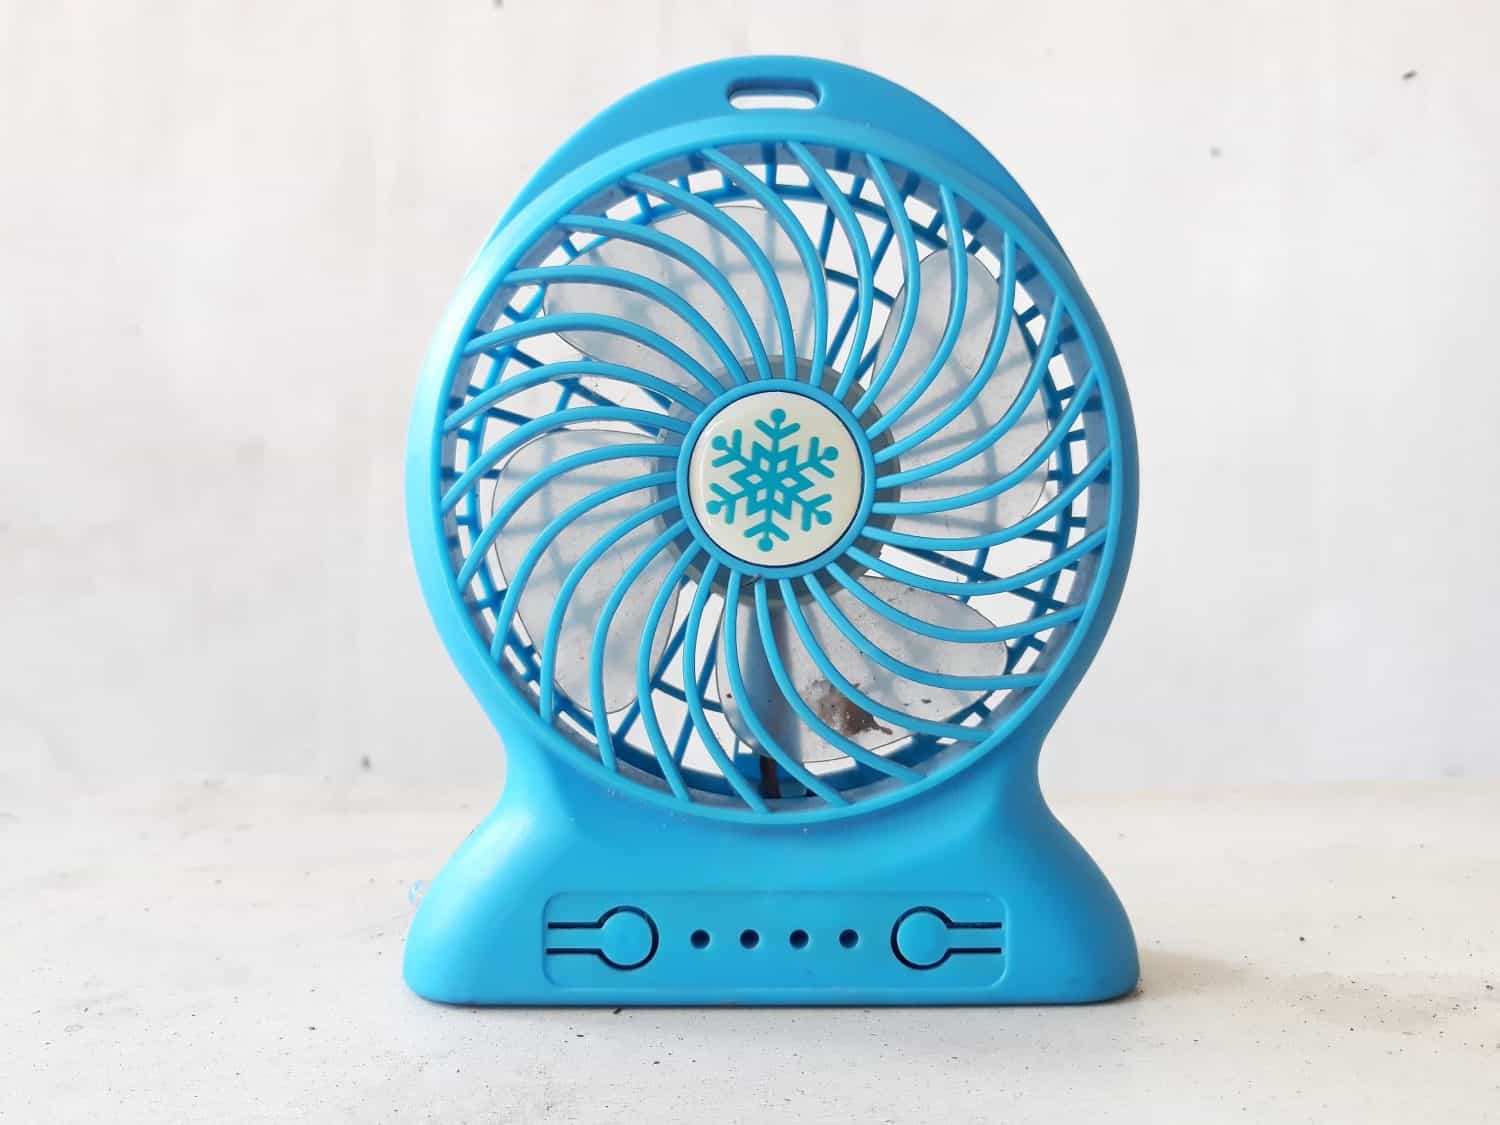 A dirty blue mini portable fan that has not been cleaned, on a white background.